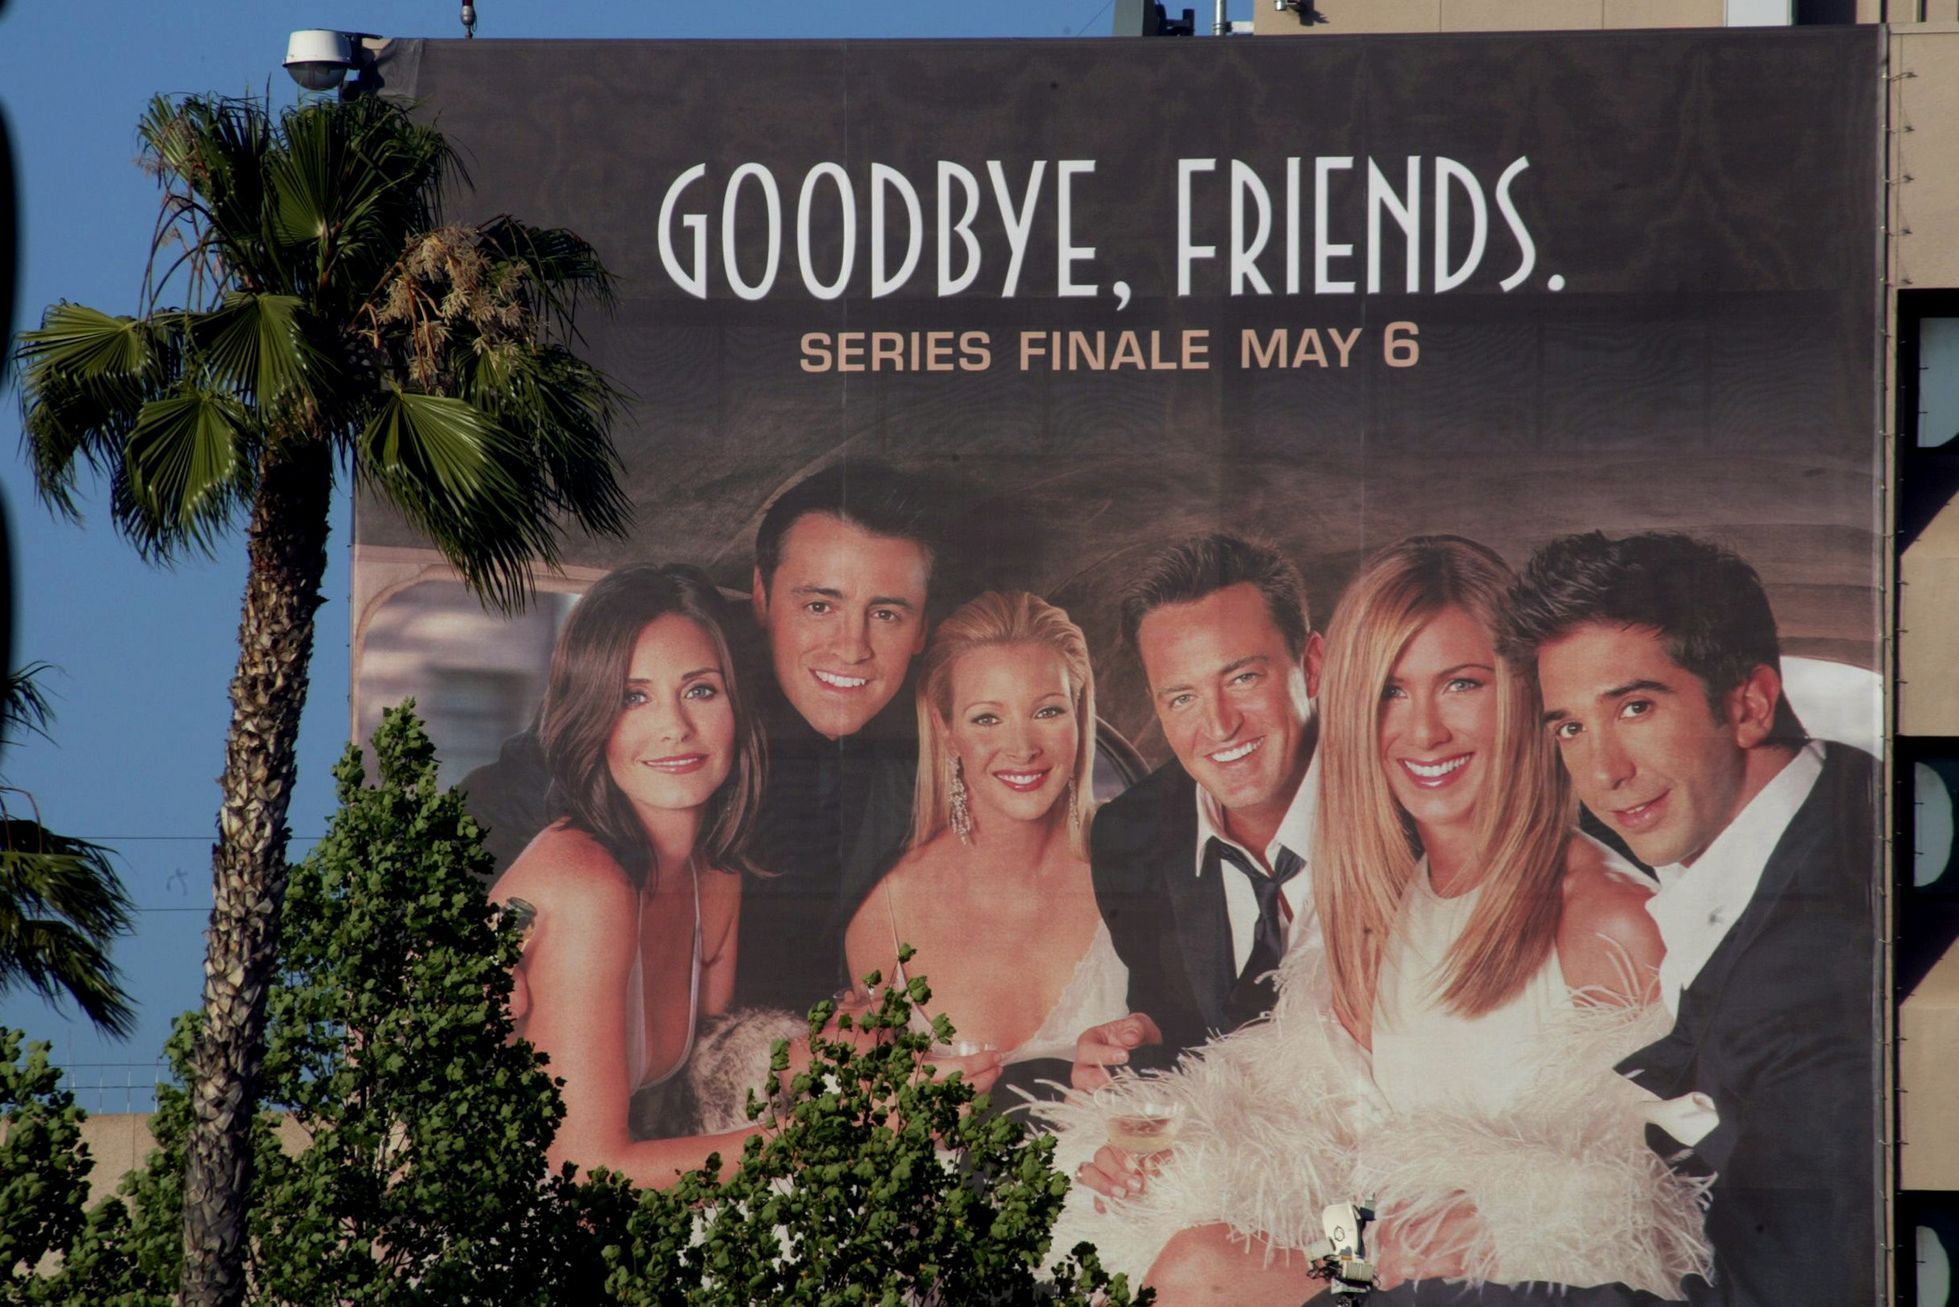 FILE PHOTO: CAST OF TELEVISION SERIES FRIENDS ON GIANT BILLBOARD.